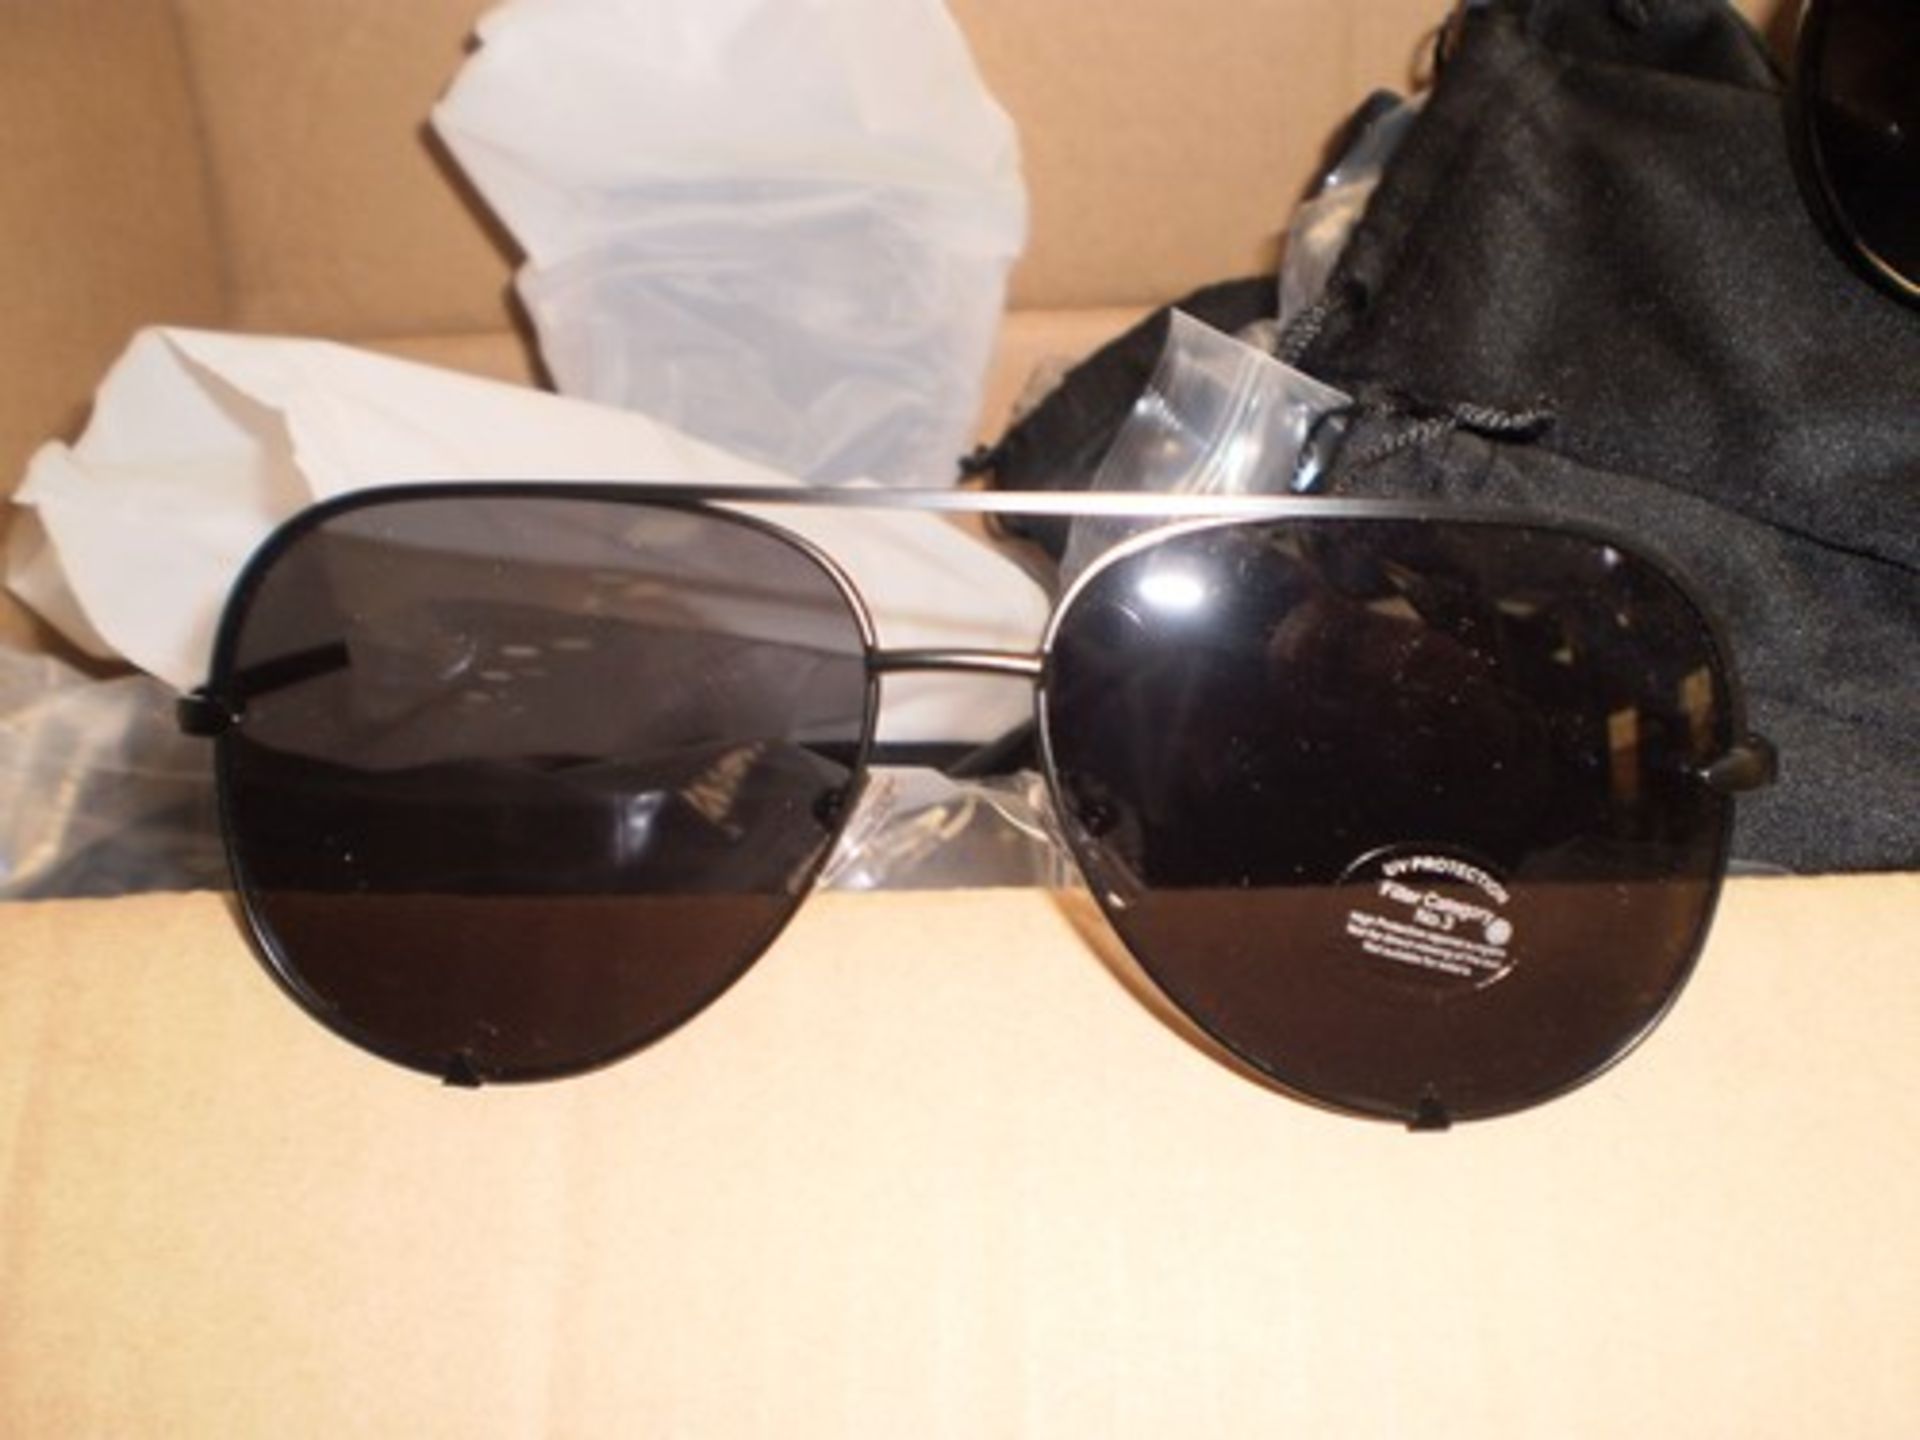 45 x pairs of unbranded sunglasses with UV protection, all with cloth glass bag - new (C9C) - Image 2 of 3